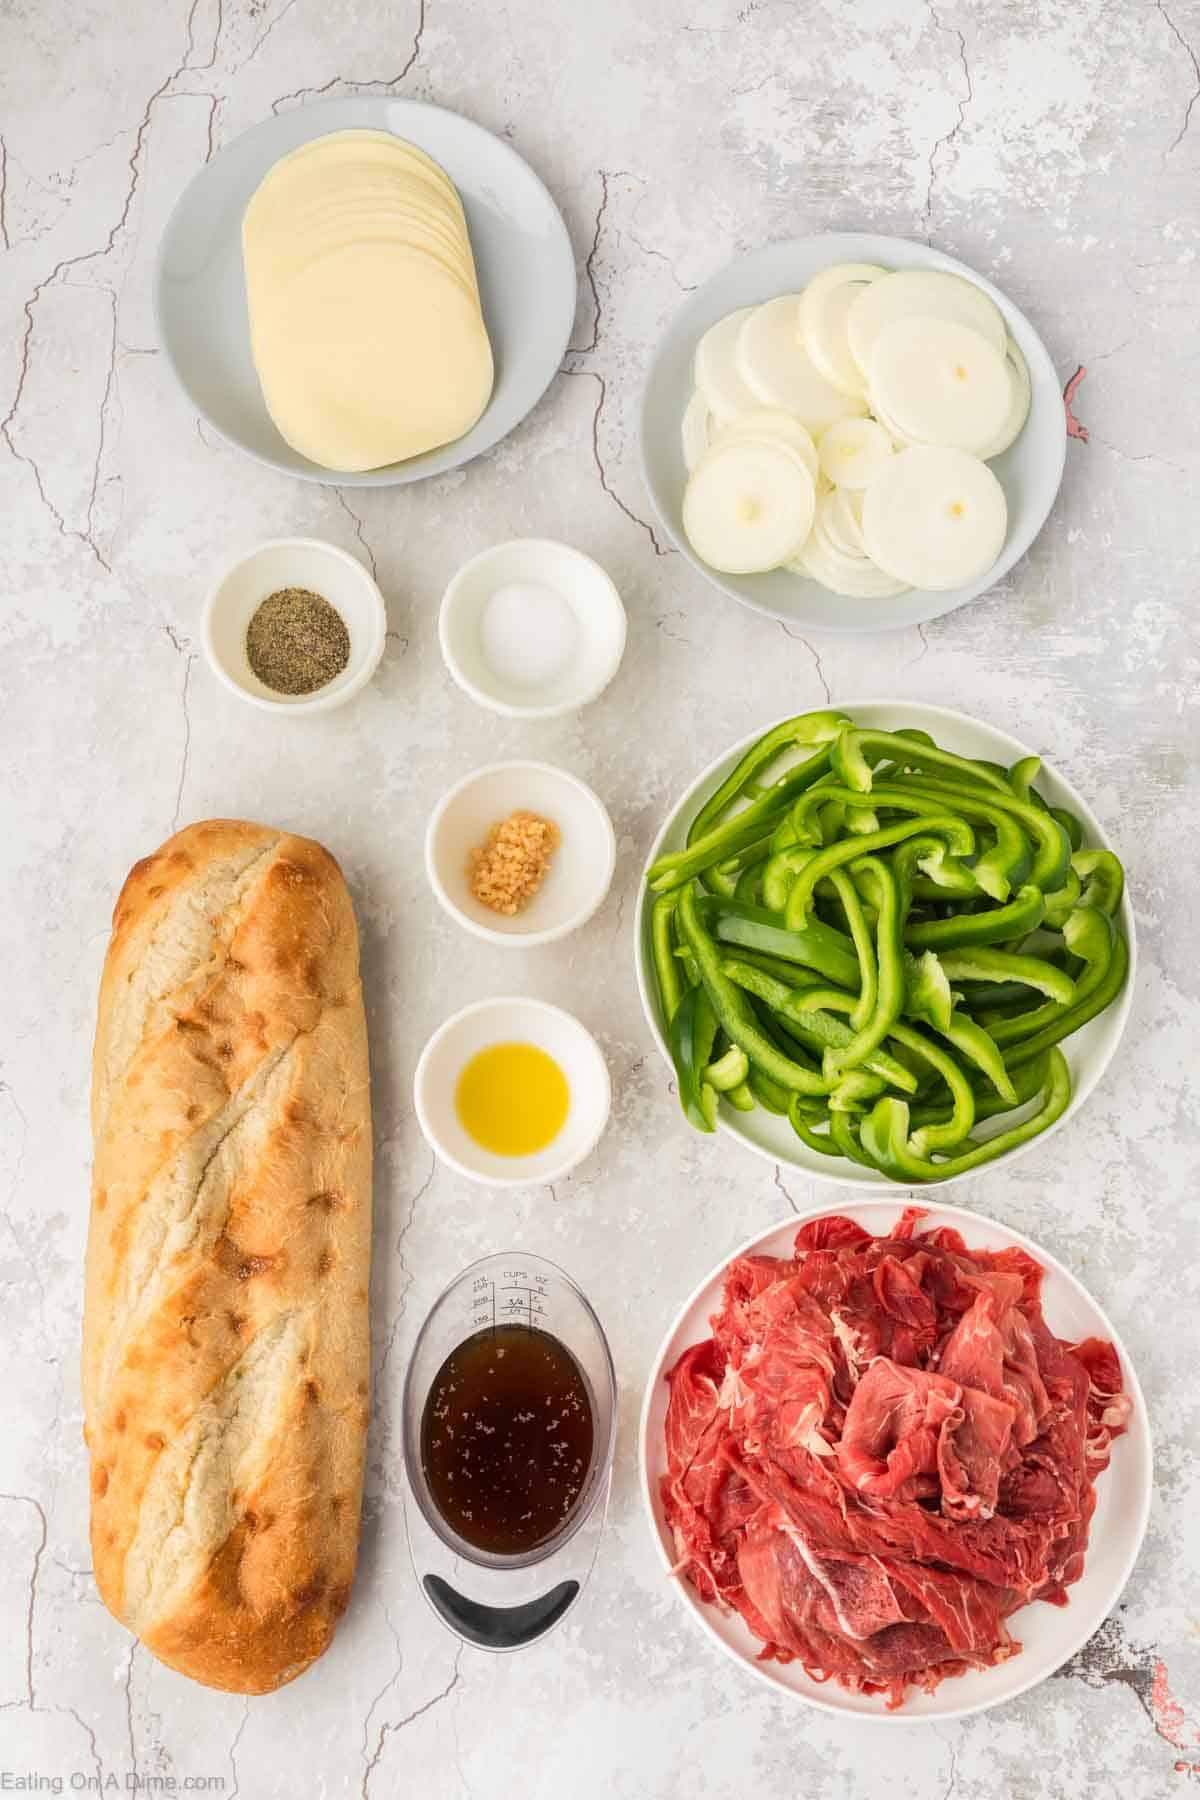 Cheesesteak Bread ingredients - oil, sirloin steak, green bell peppers, white onion, garlic, salt, pepper, beef broth, provolone cheese, French Bread